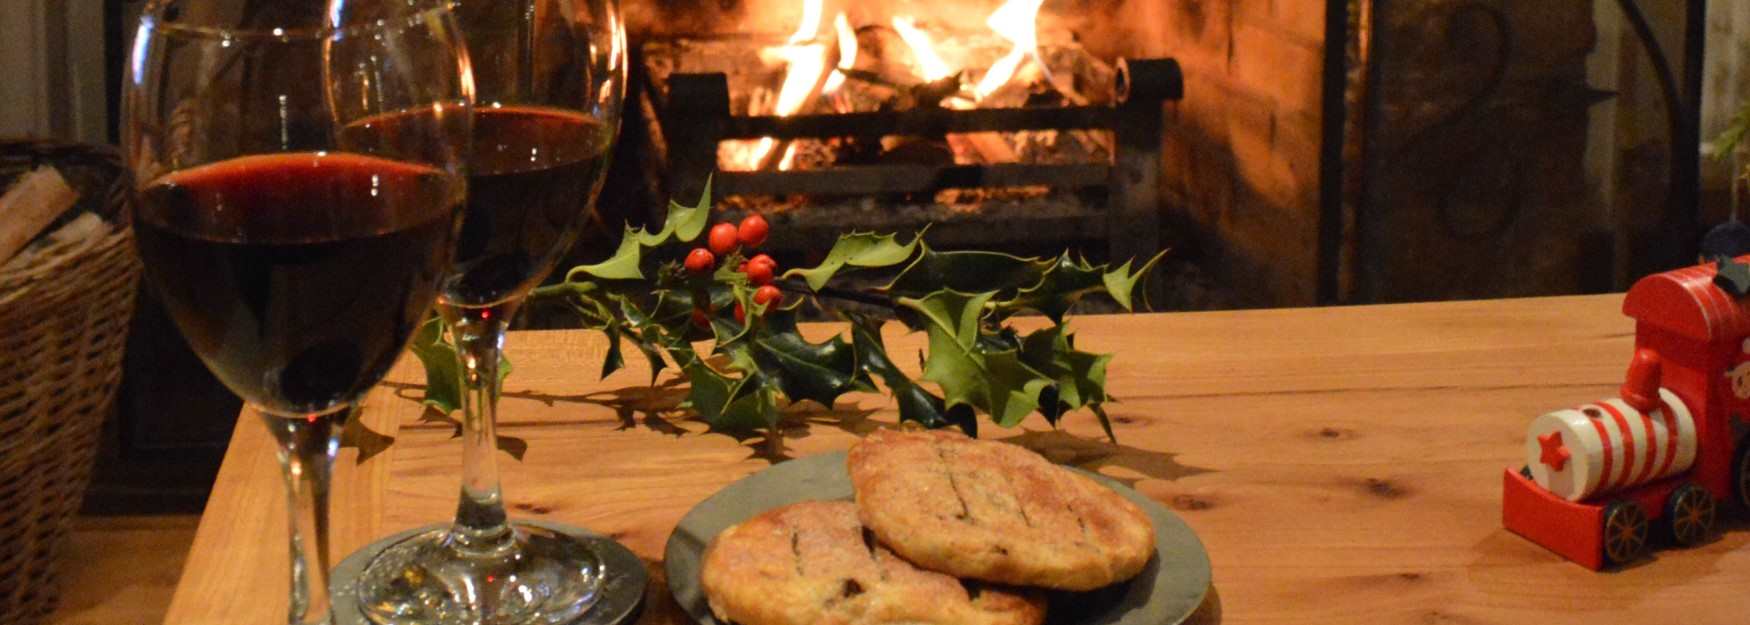 A warming drink and pastry by the open fire at Heath Farm Holiday Cottages